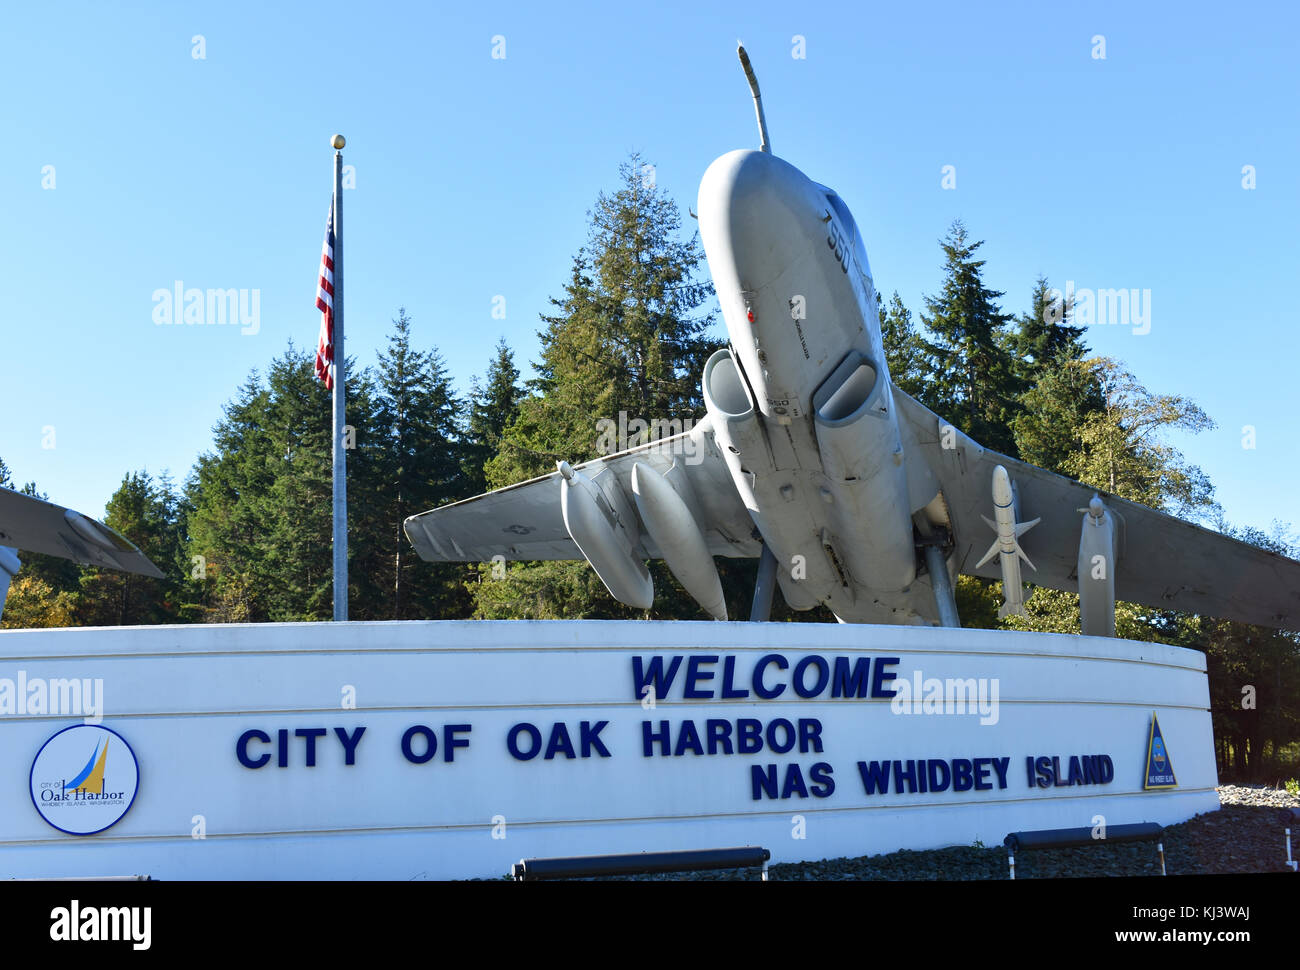 Two Navy fighter jets with bombs underneath welcome visitors to Oak Harbor on Whidbey Island in Washington State. Stock Photo